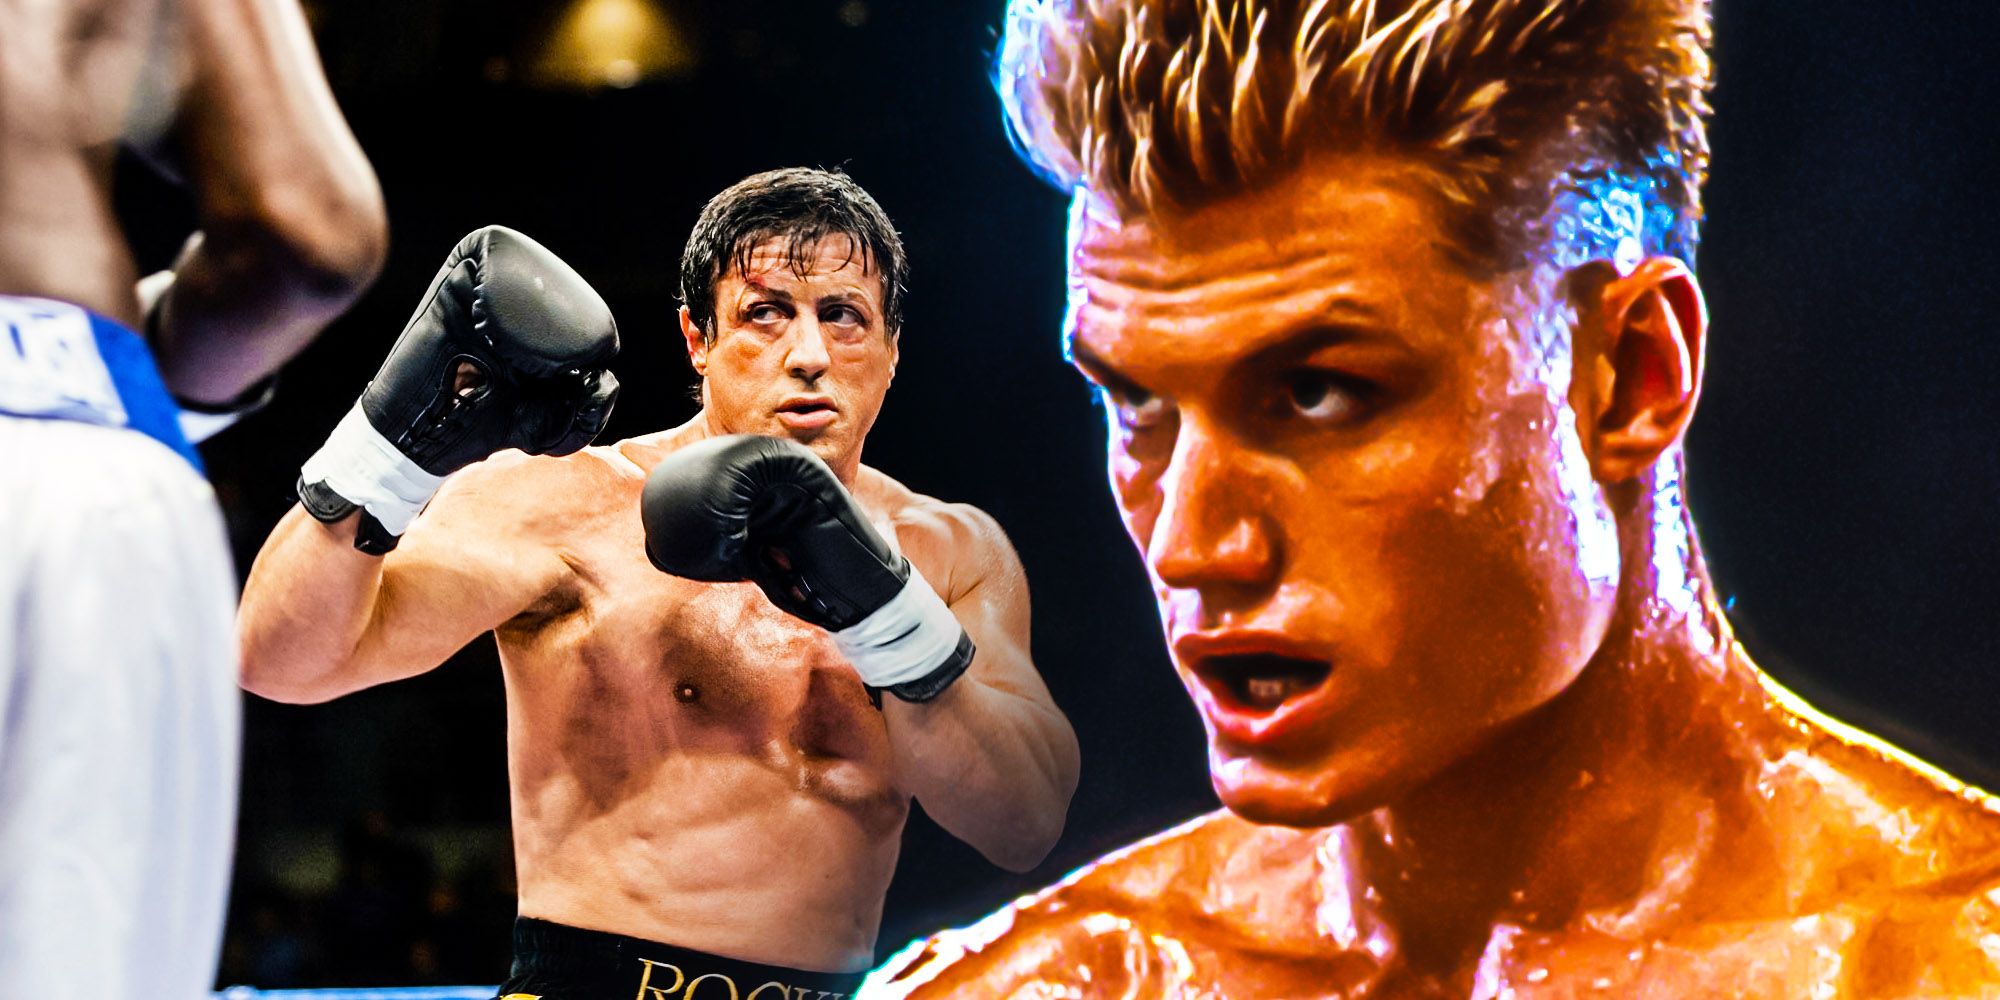 Remembering how Rocky Balboa defied the critics to defeat Ivan Drago, Boxing